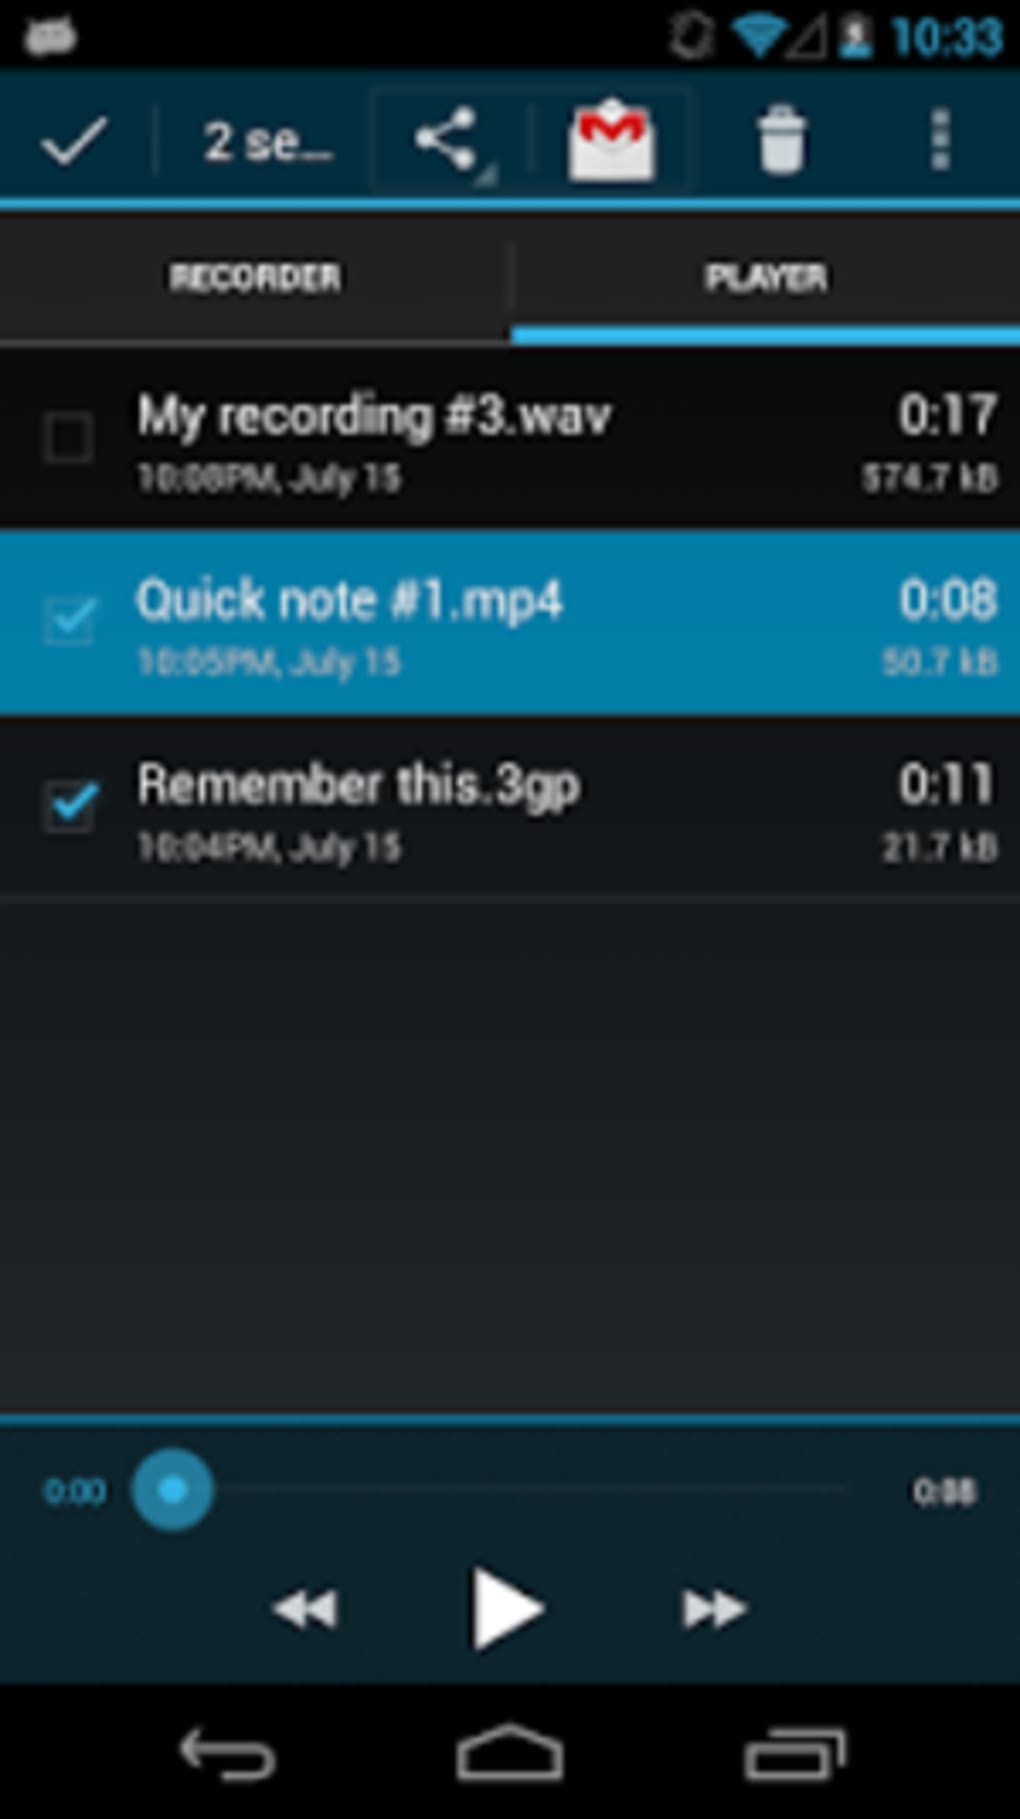 voice recorder app android free download